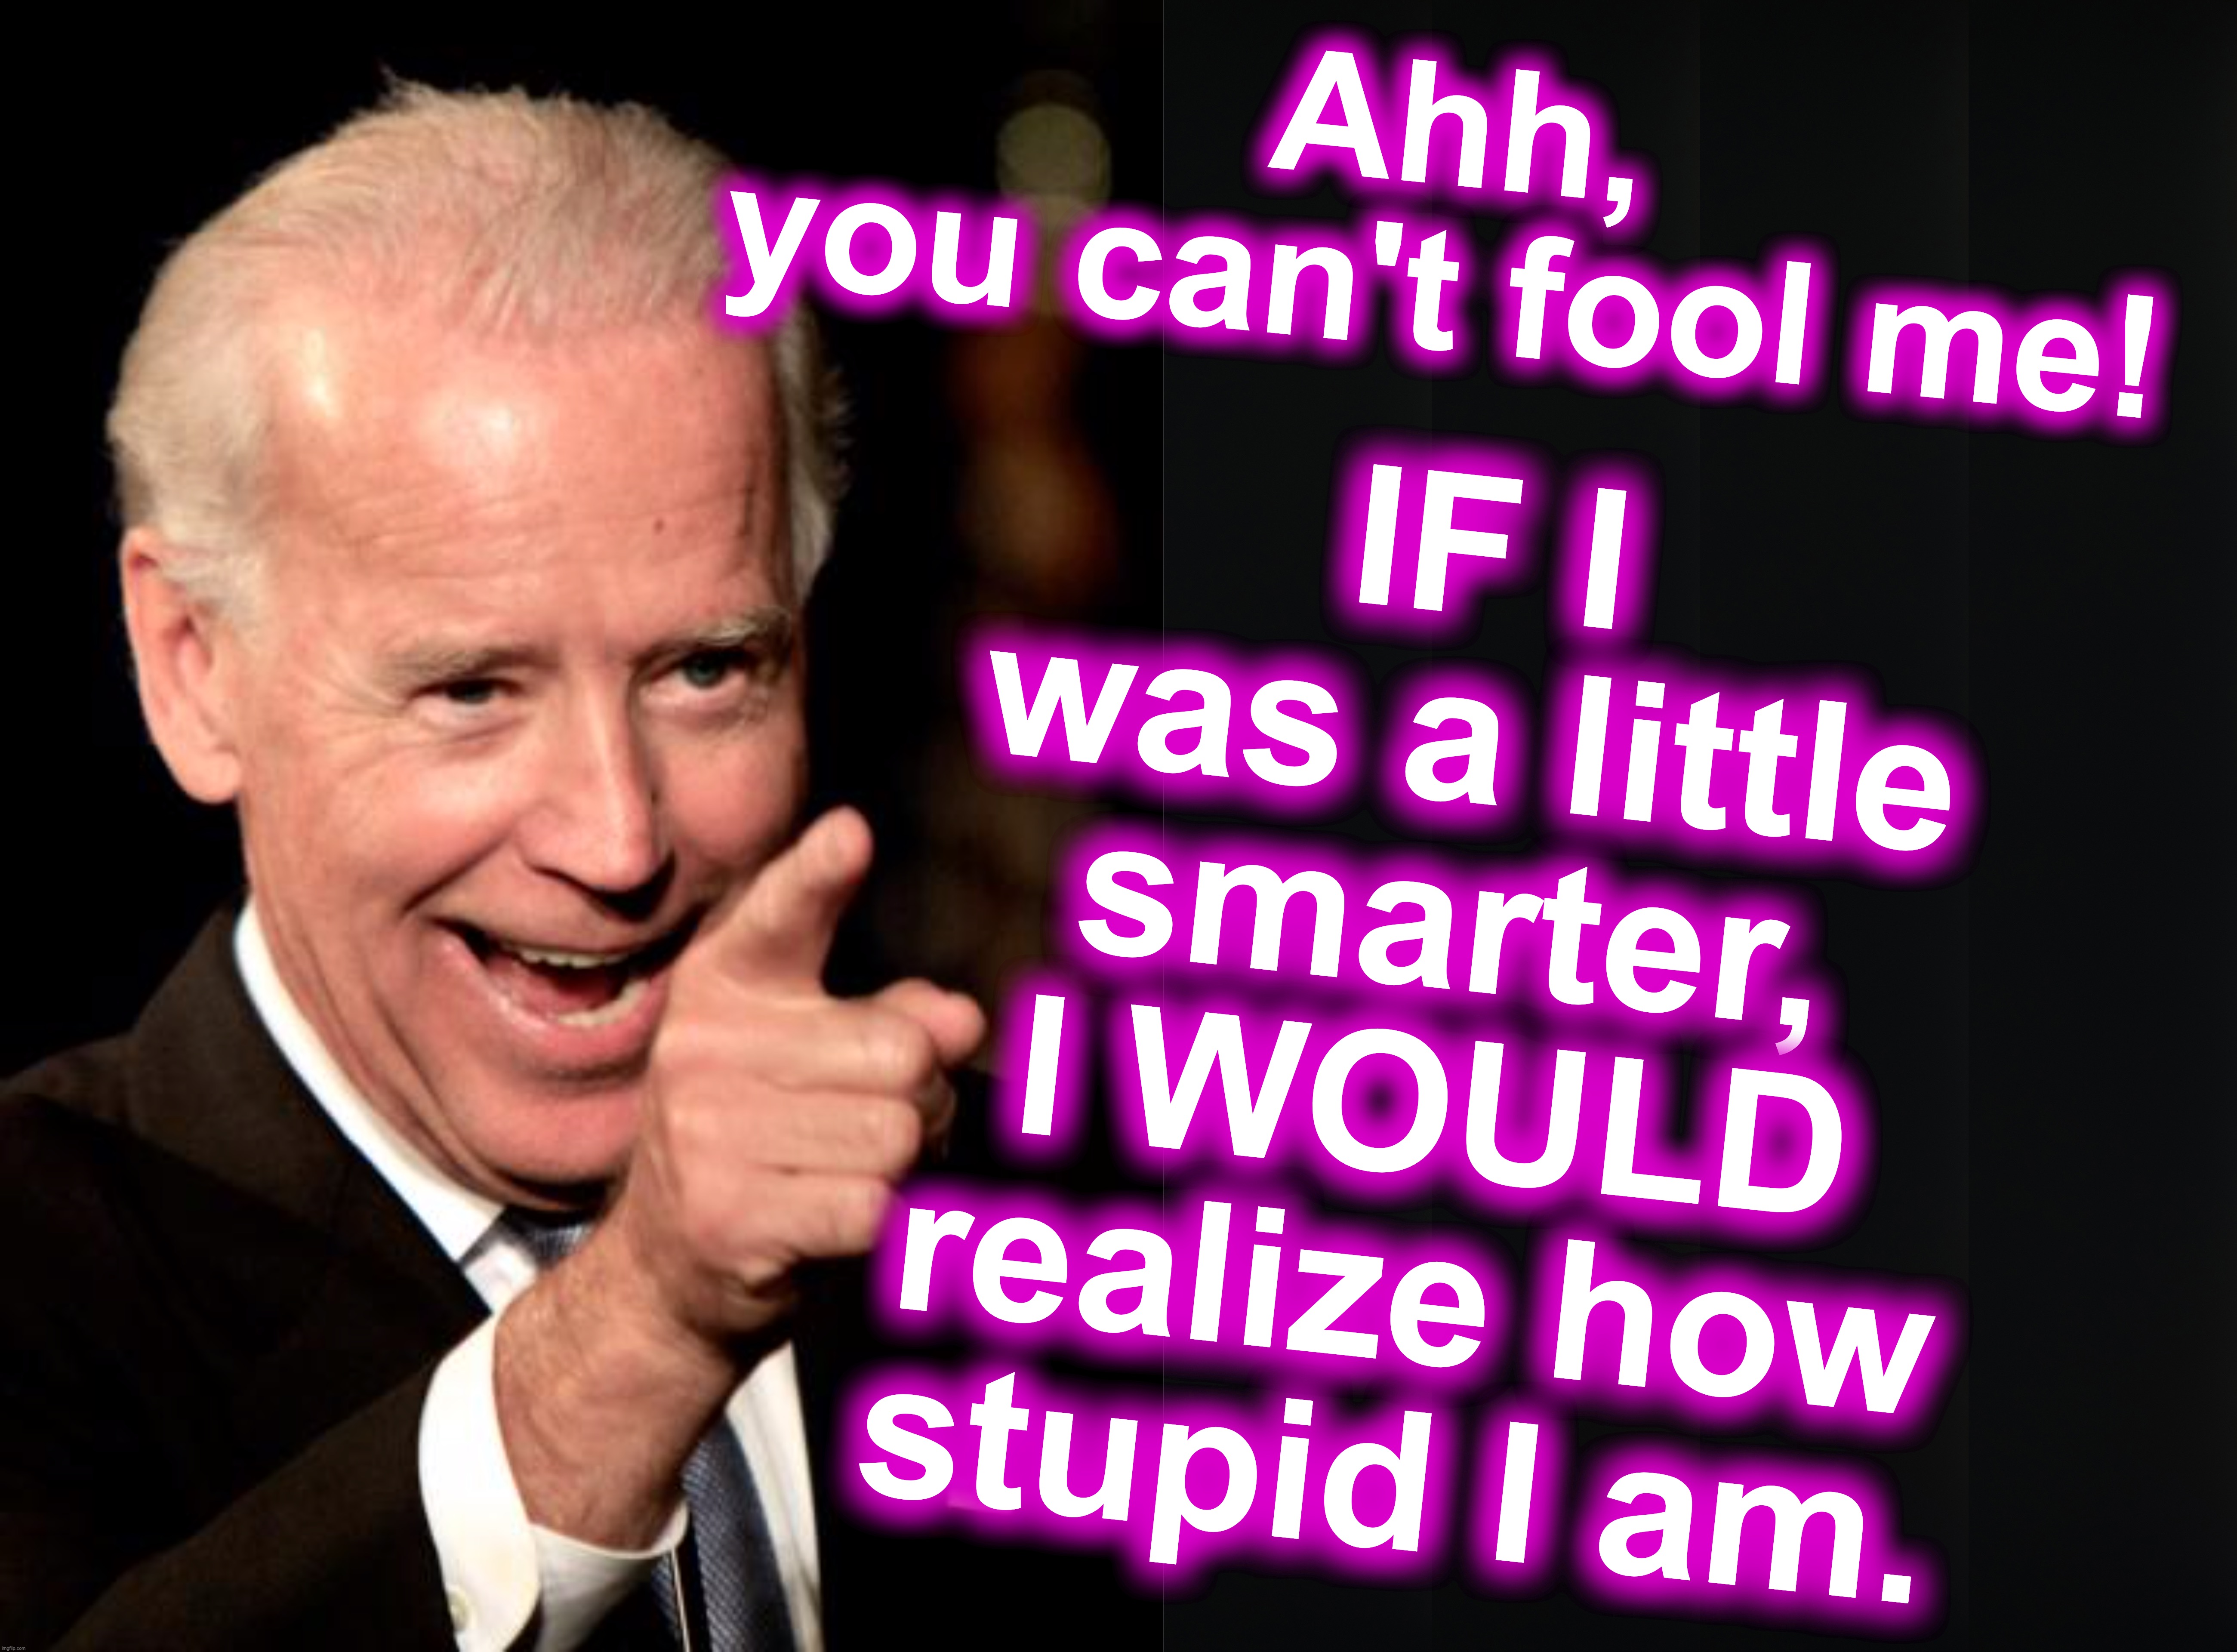 then again, maybe he's playing it up? | IF I was a little smarter, I WOULD realize how stupid I am. Ahh, you can't fool me! | image tagged in memes,smilin biden | made w/ Imgflip meme maker